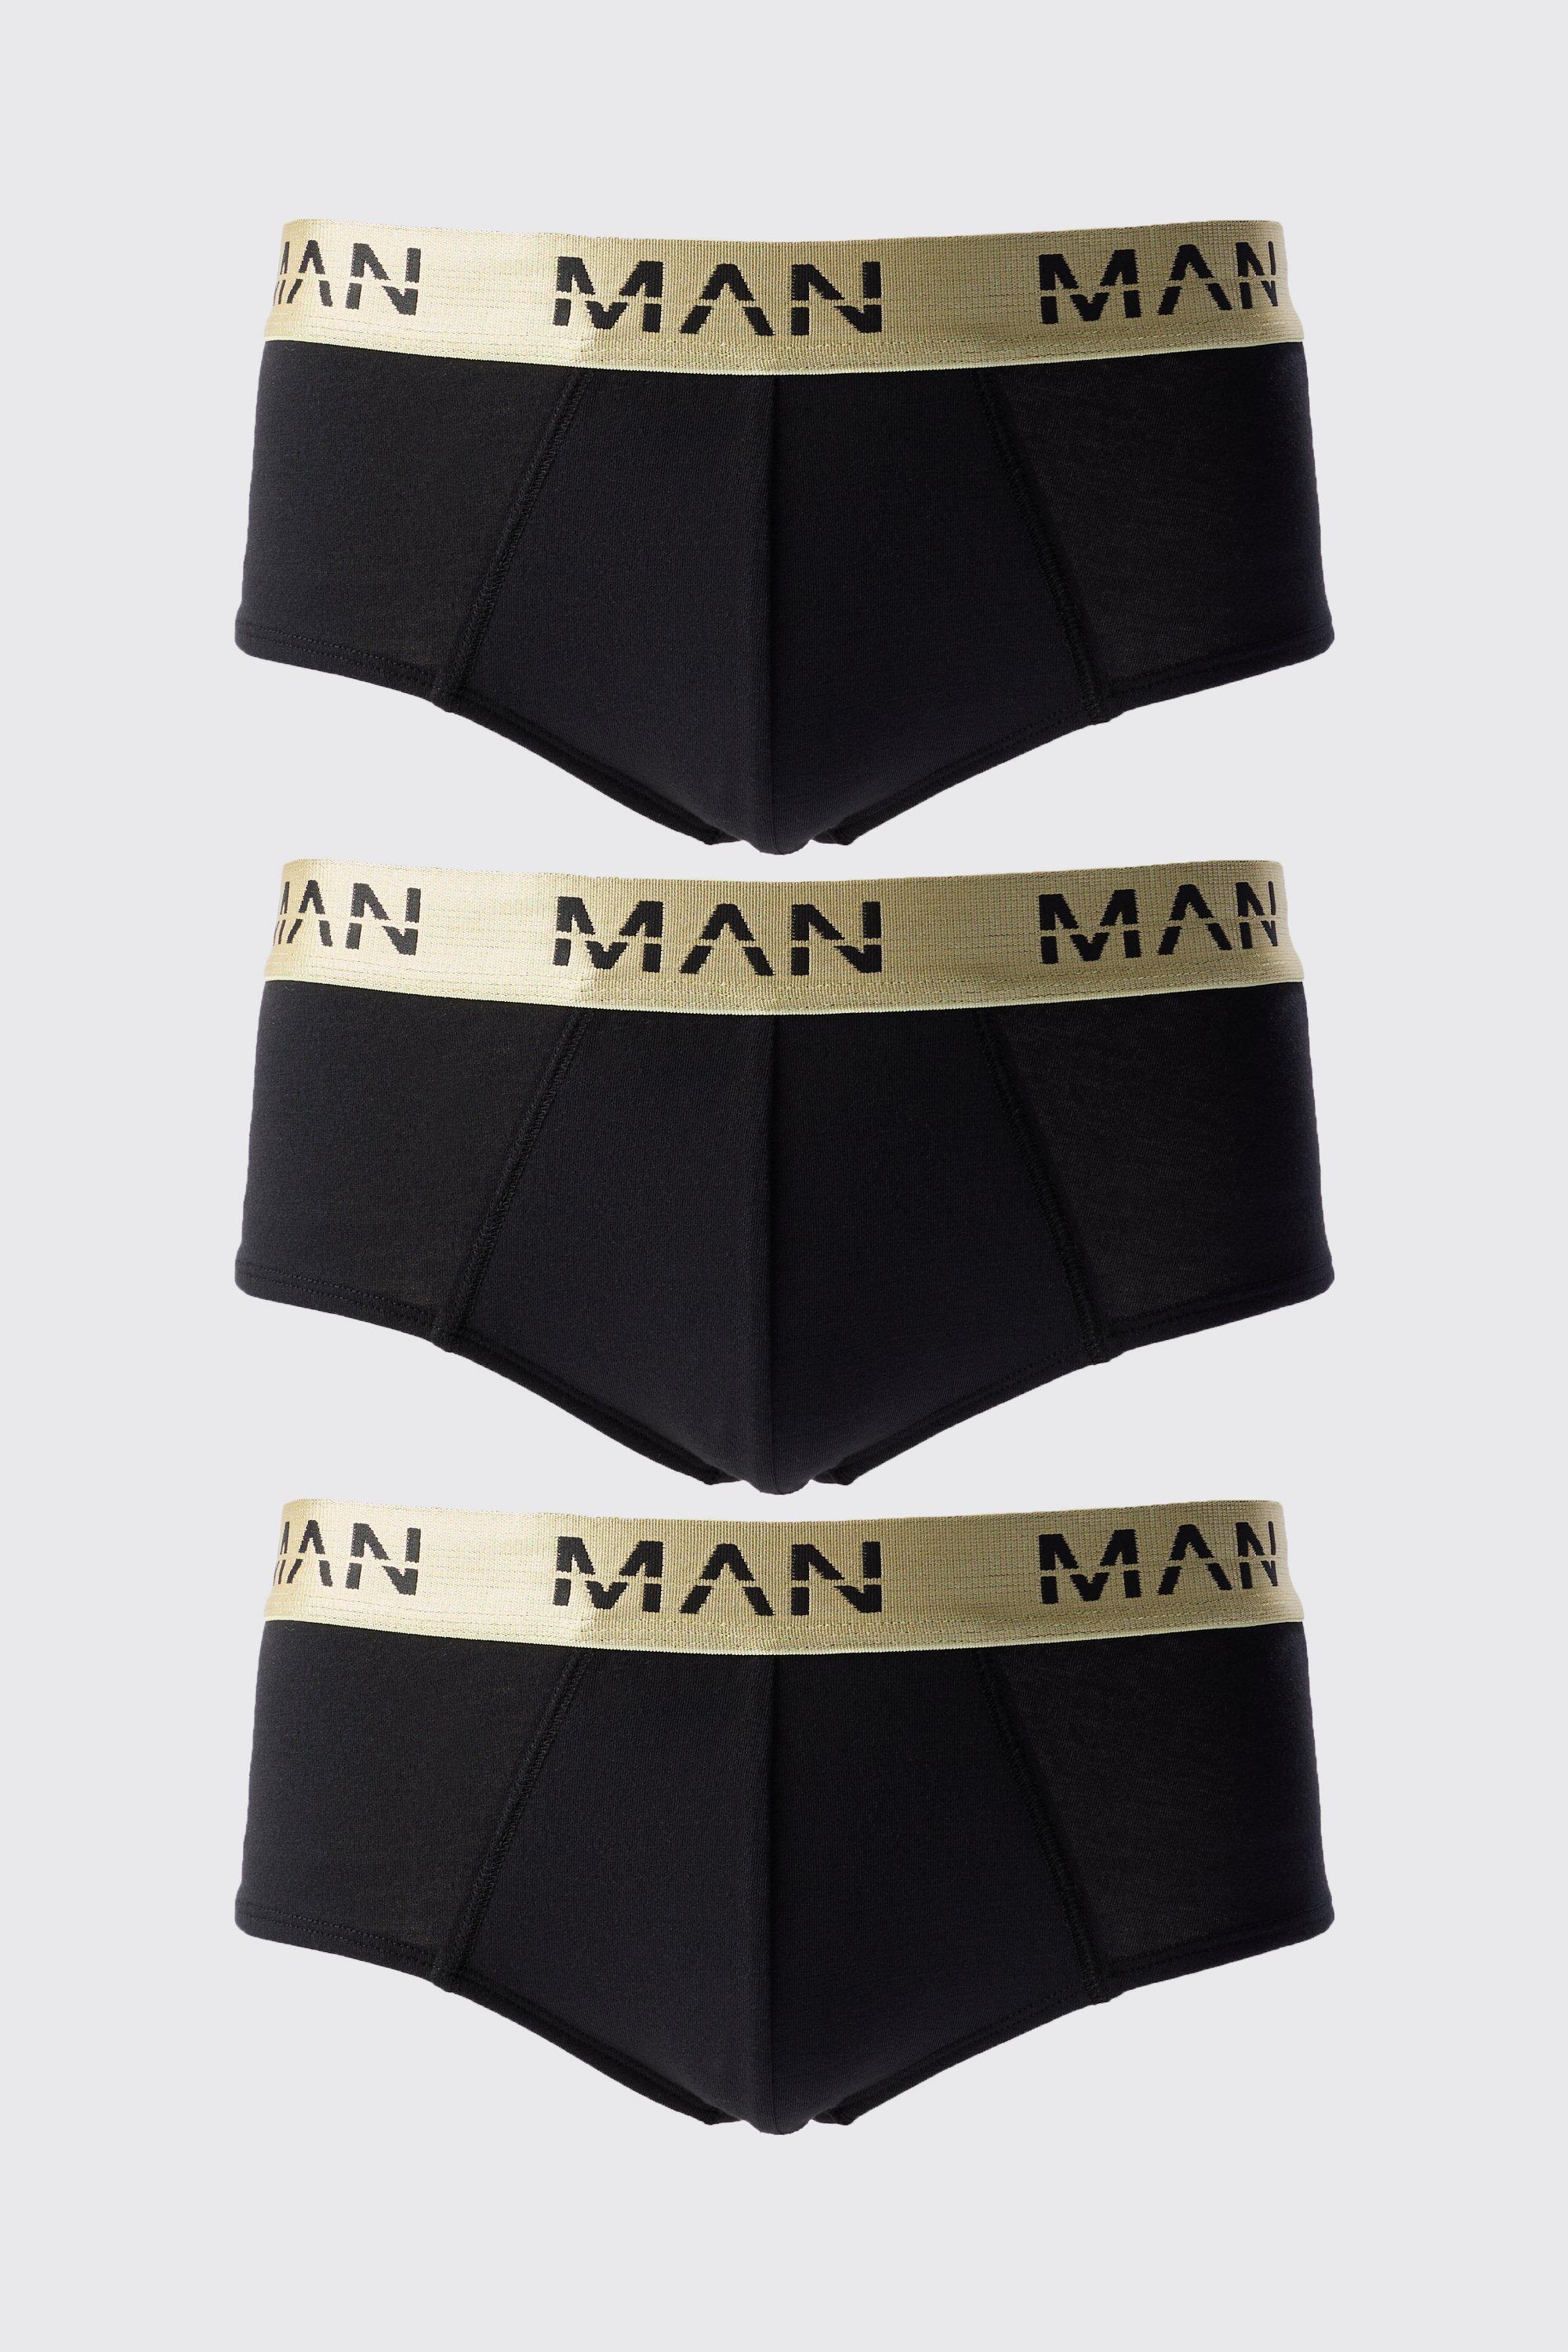 Image of 3 Pack Man Roman Gold Waistband Briefs In Black, Nero